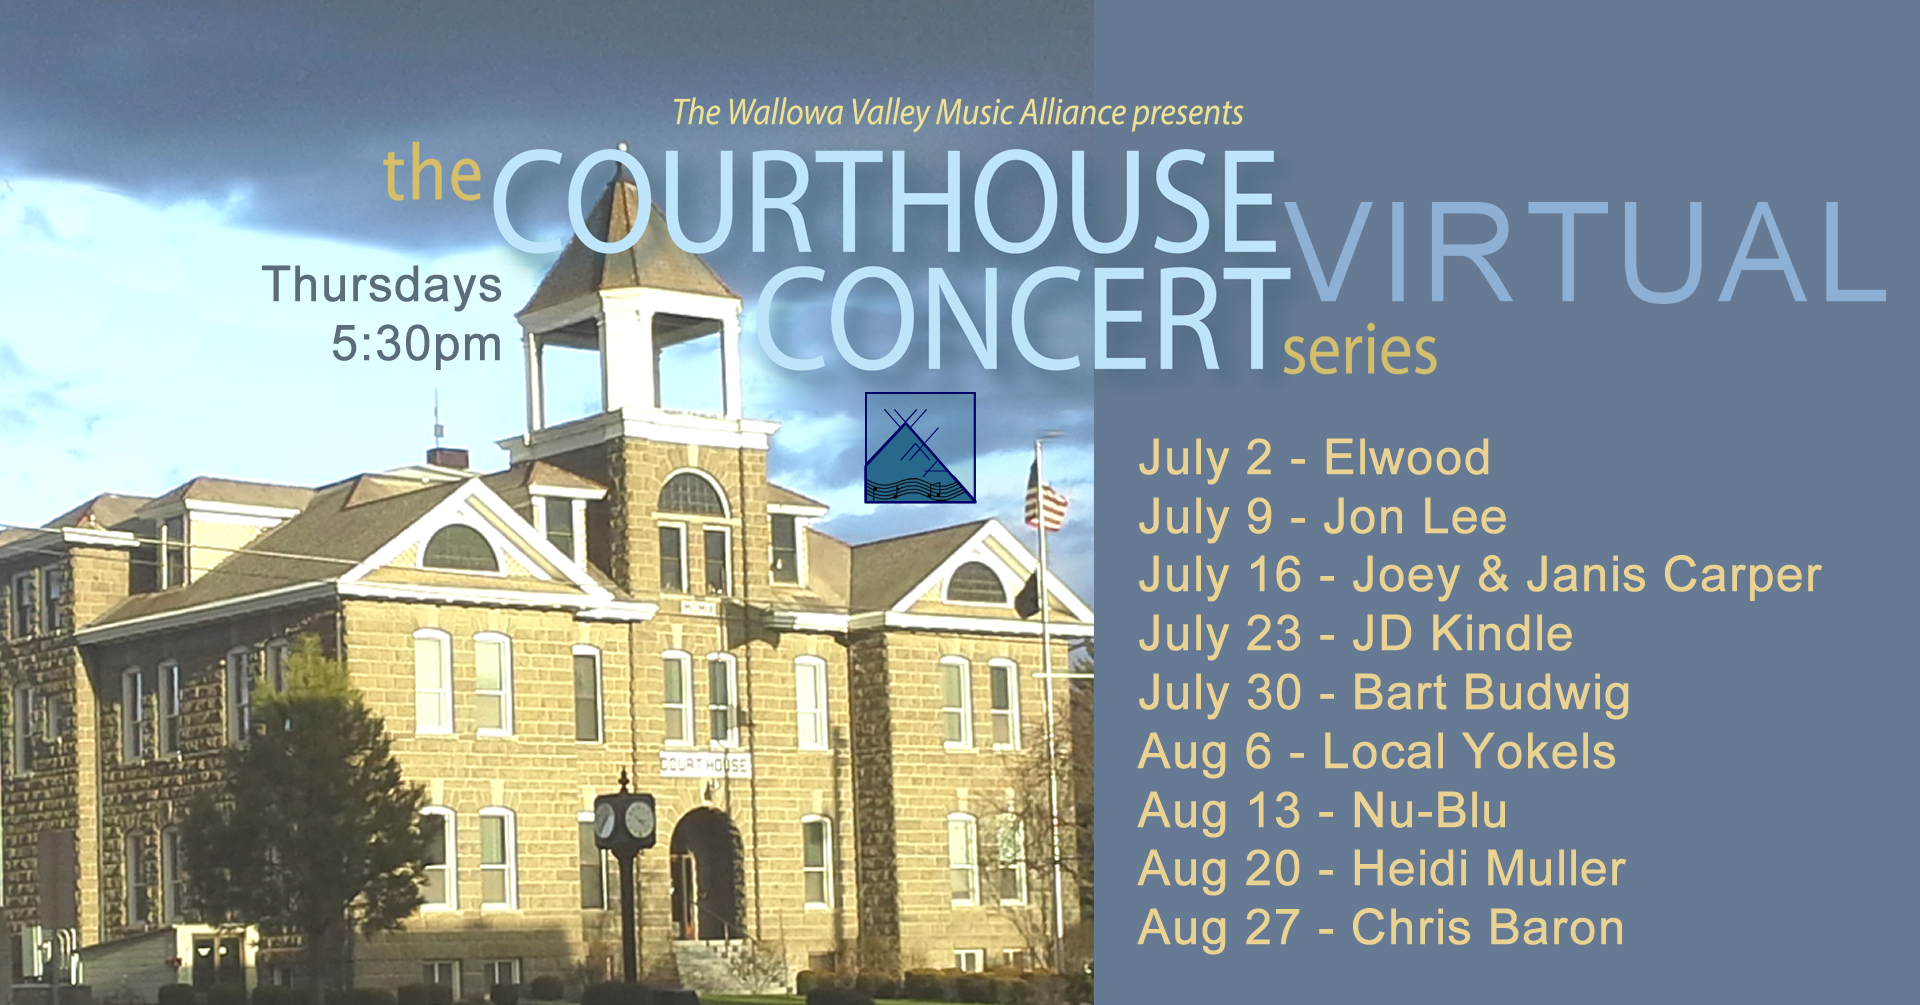 Courthouse Concerts go VIRTUAL! Wallowa Valley Music Alliance